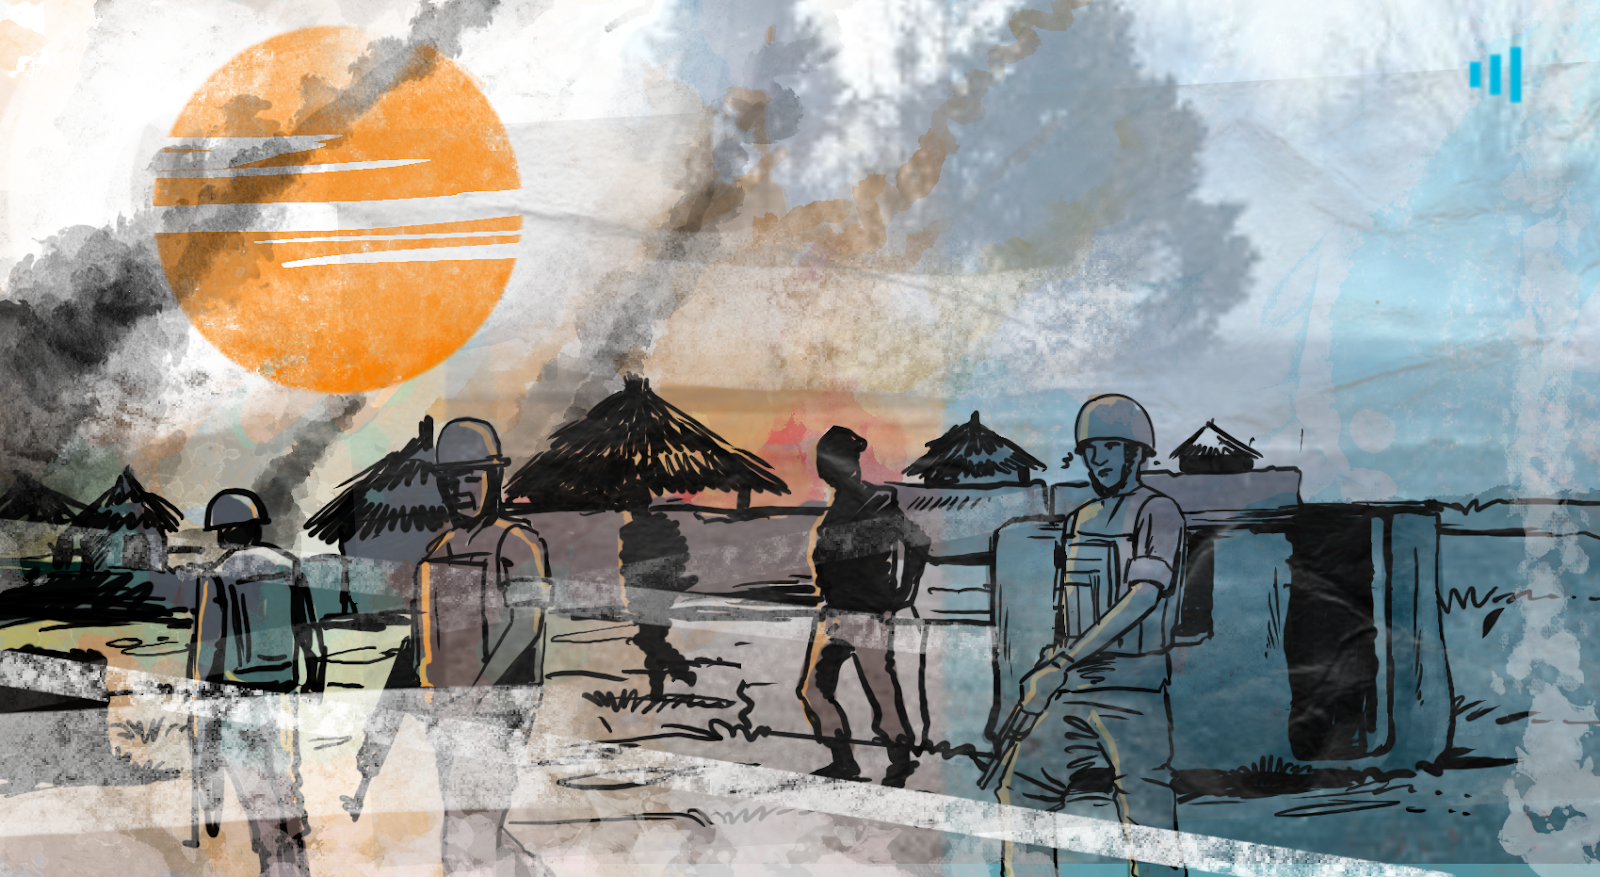 Illustration of soldiers on a tropical beach at sunset with a large, stylized orange sun in the background.